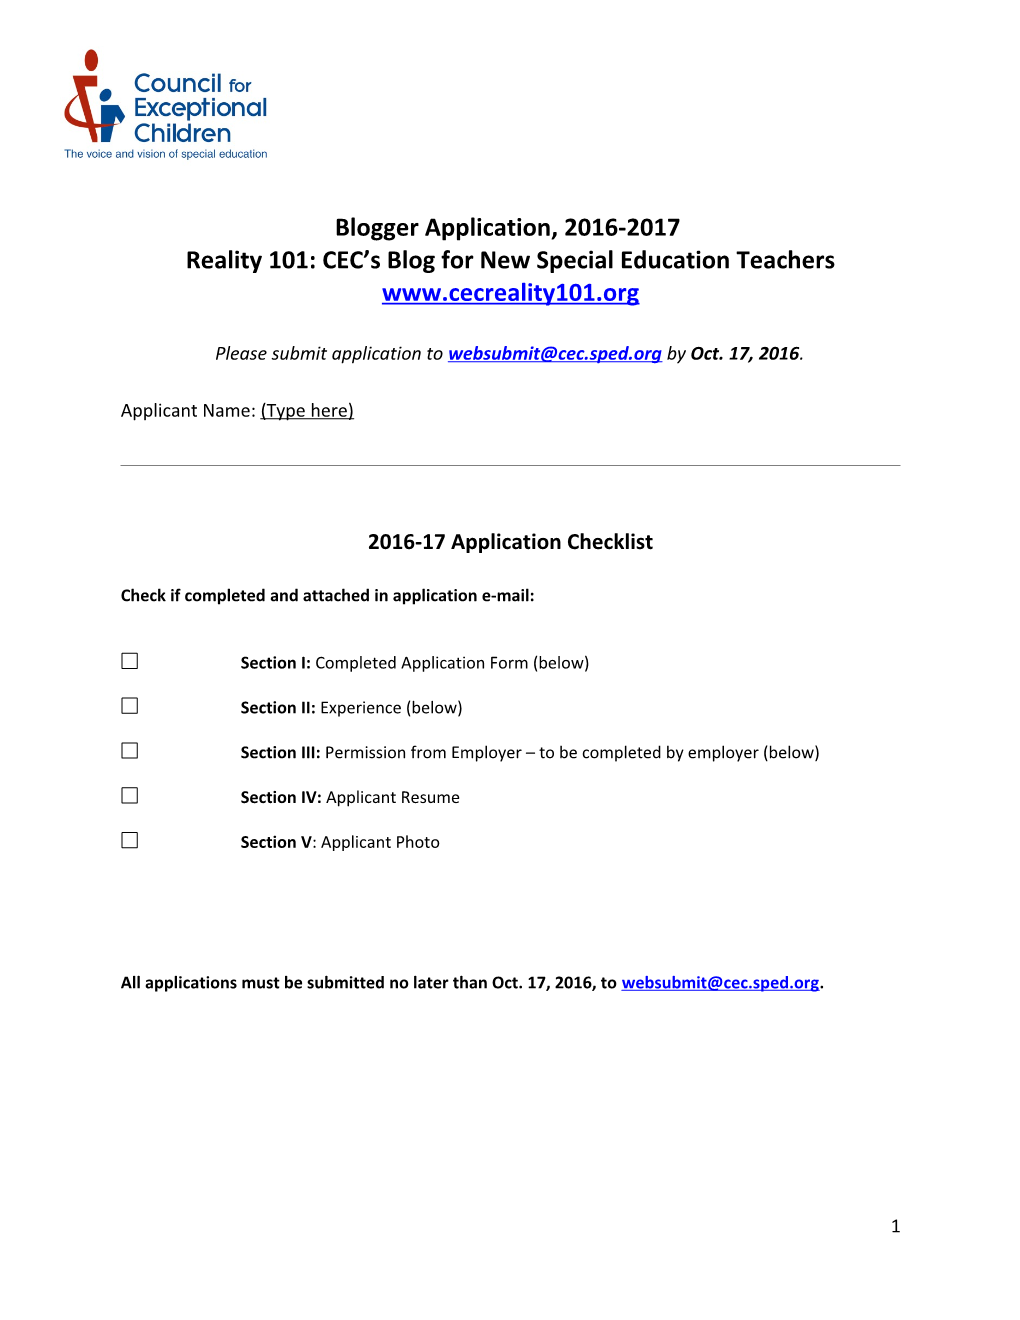 Reality 101: CEC S Blog for New Special Education Teachers